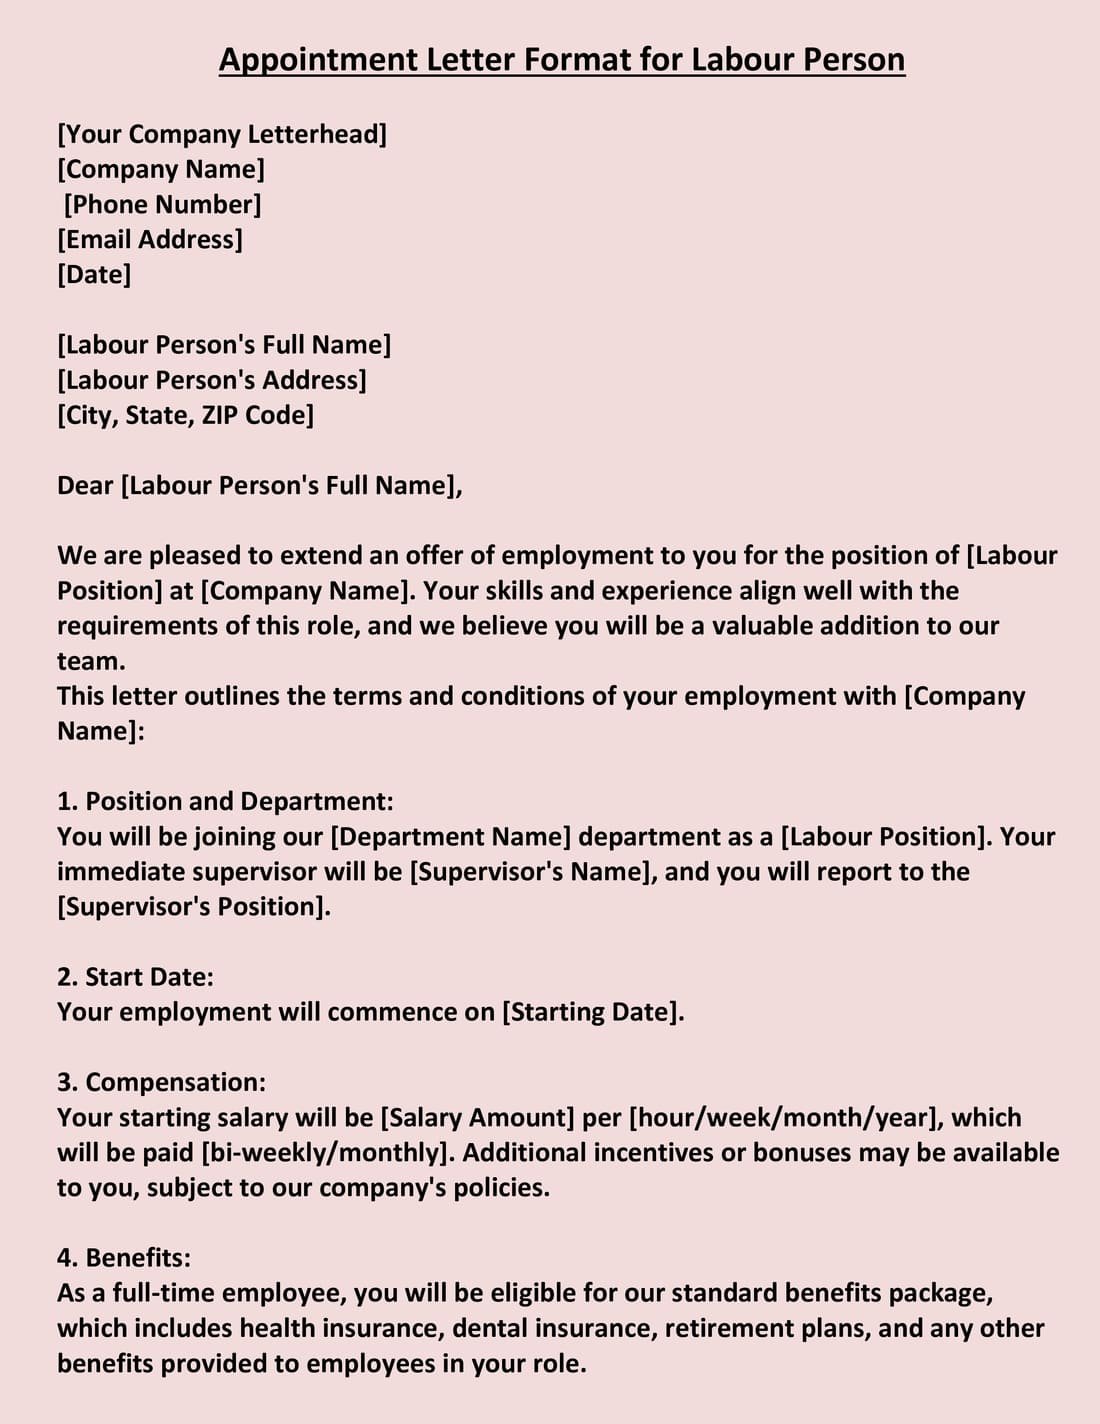 Appointment Letter Format for Labour Person